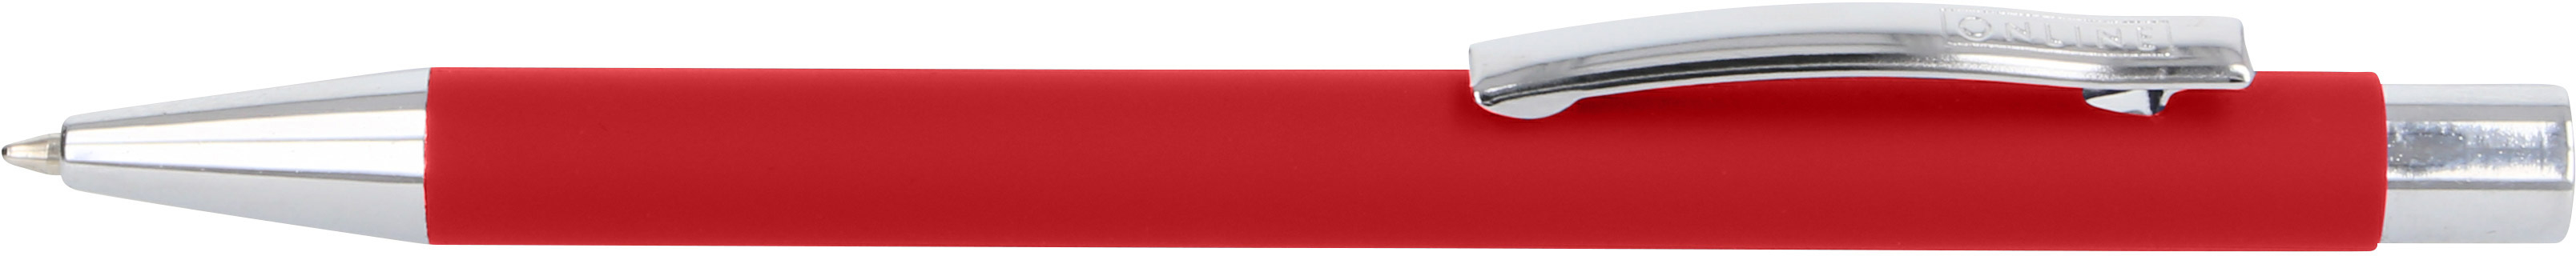 ONLINE Stylo à bille Soft Metal 21738/3D Classic Red